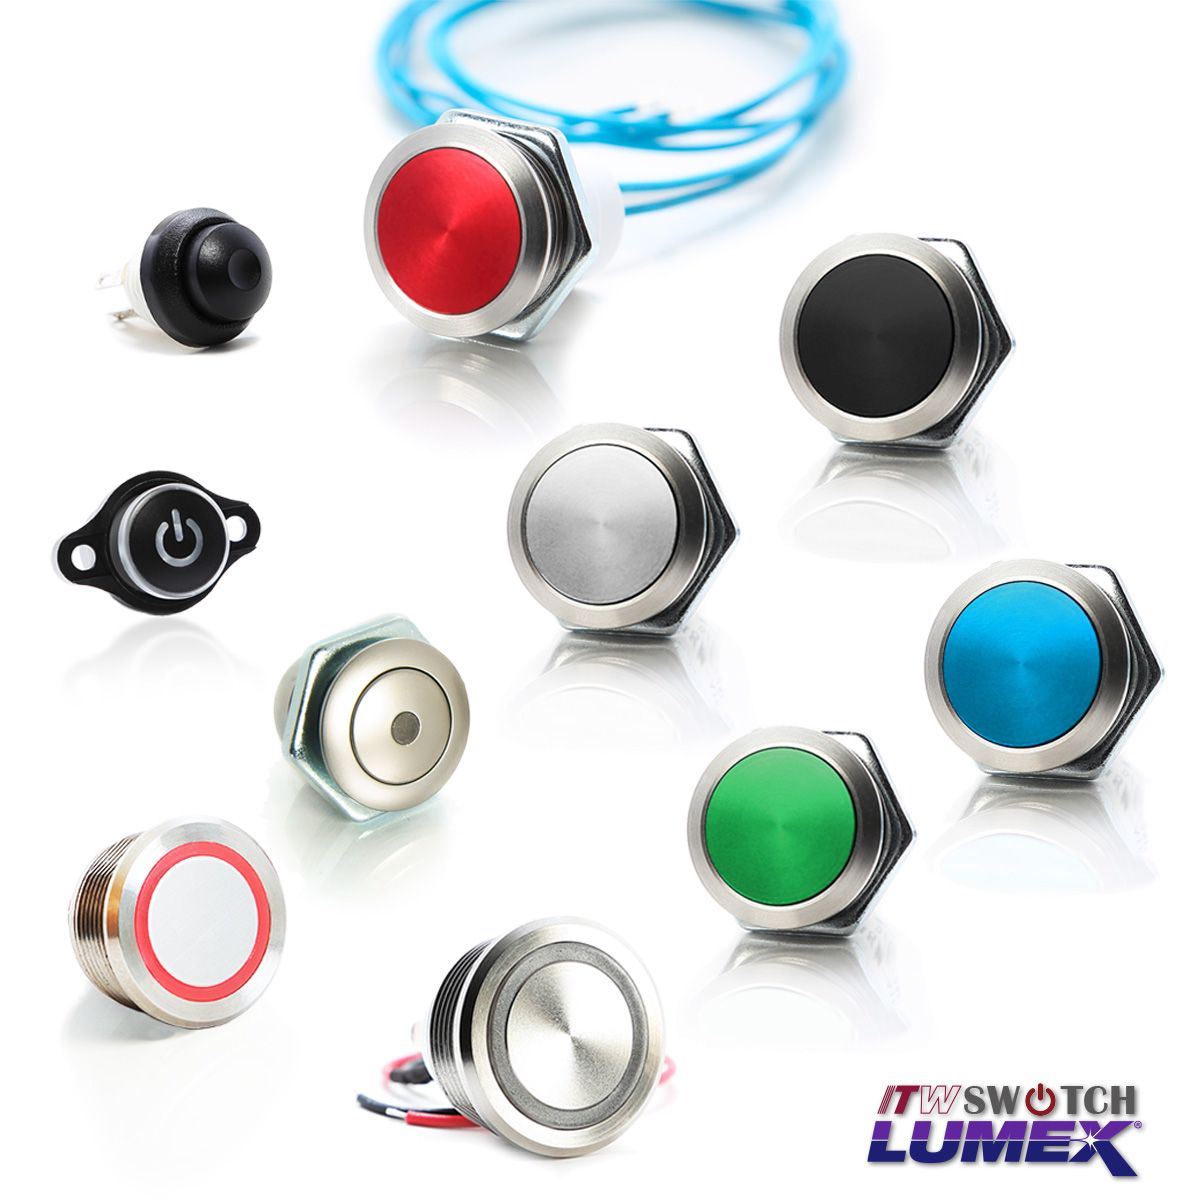 ITW Lumex Switch provides a range of Push Button Switches.